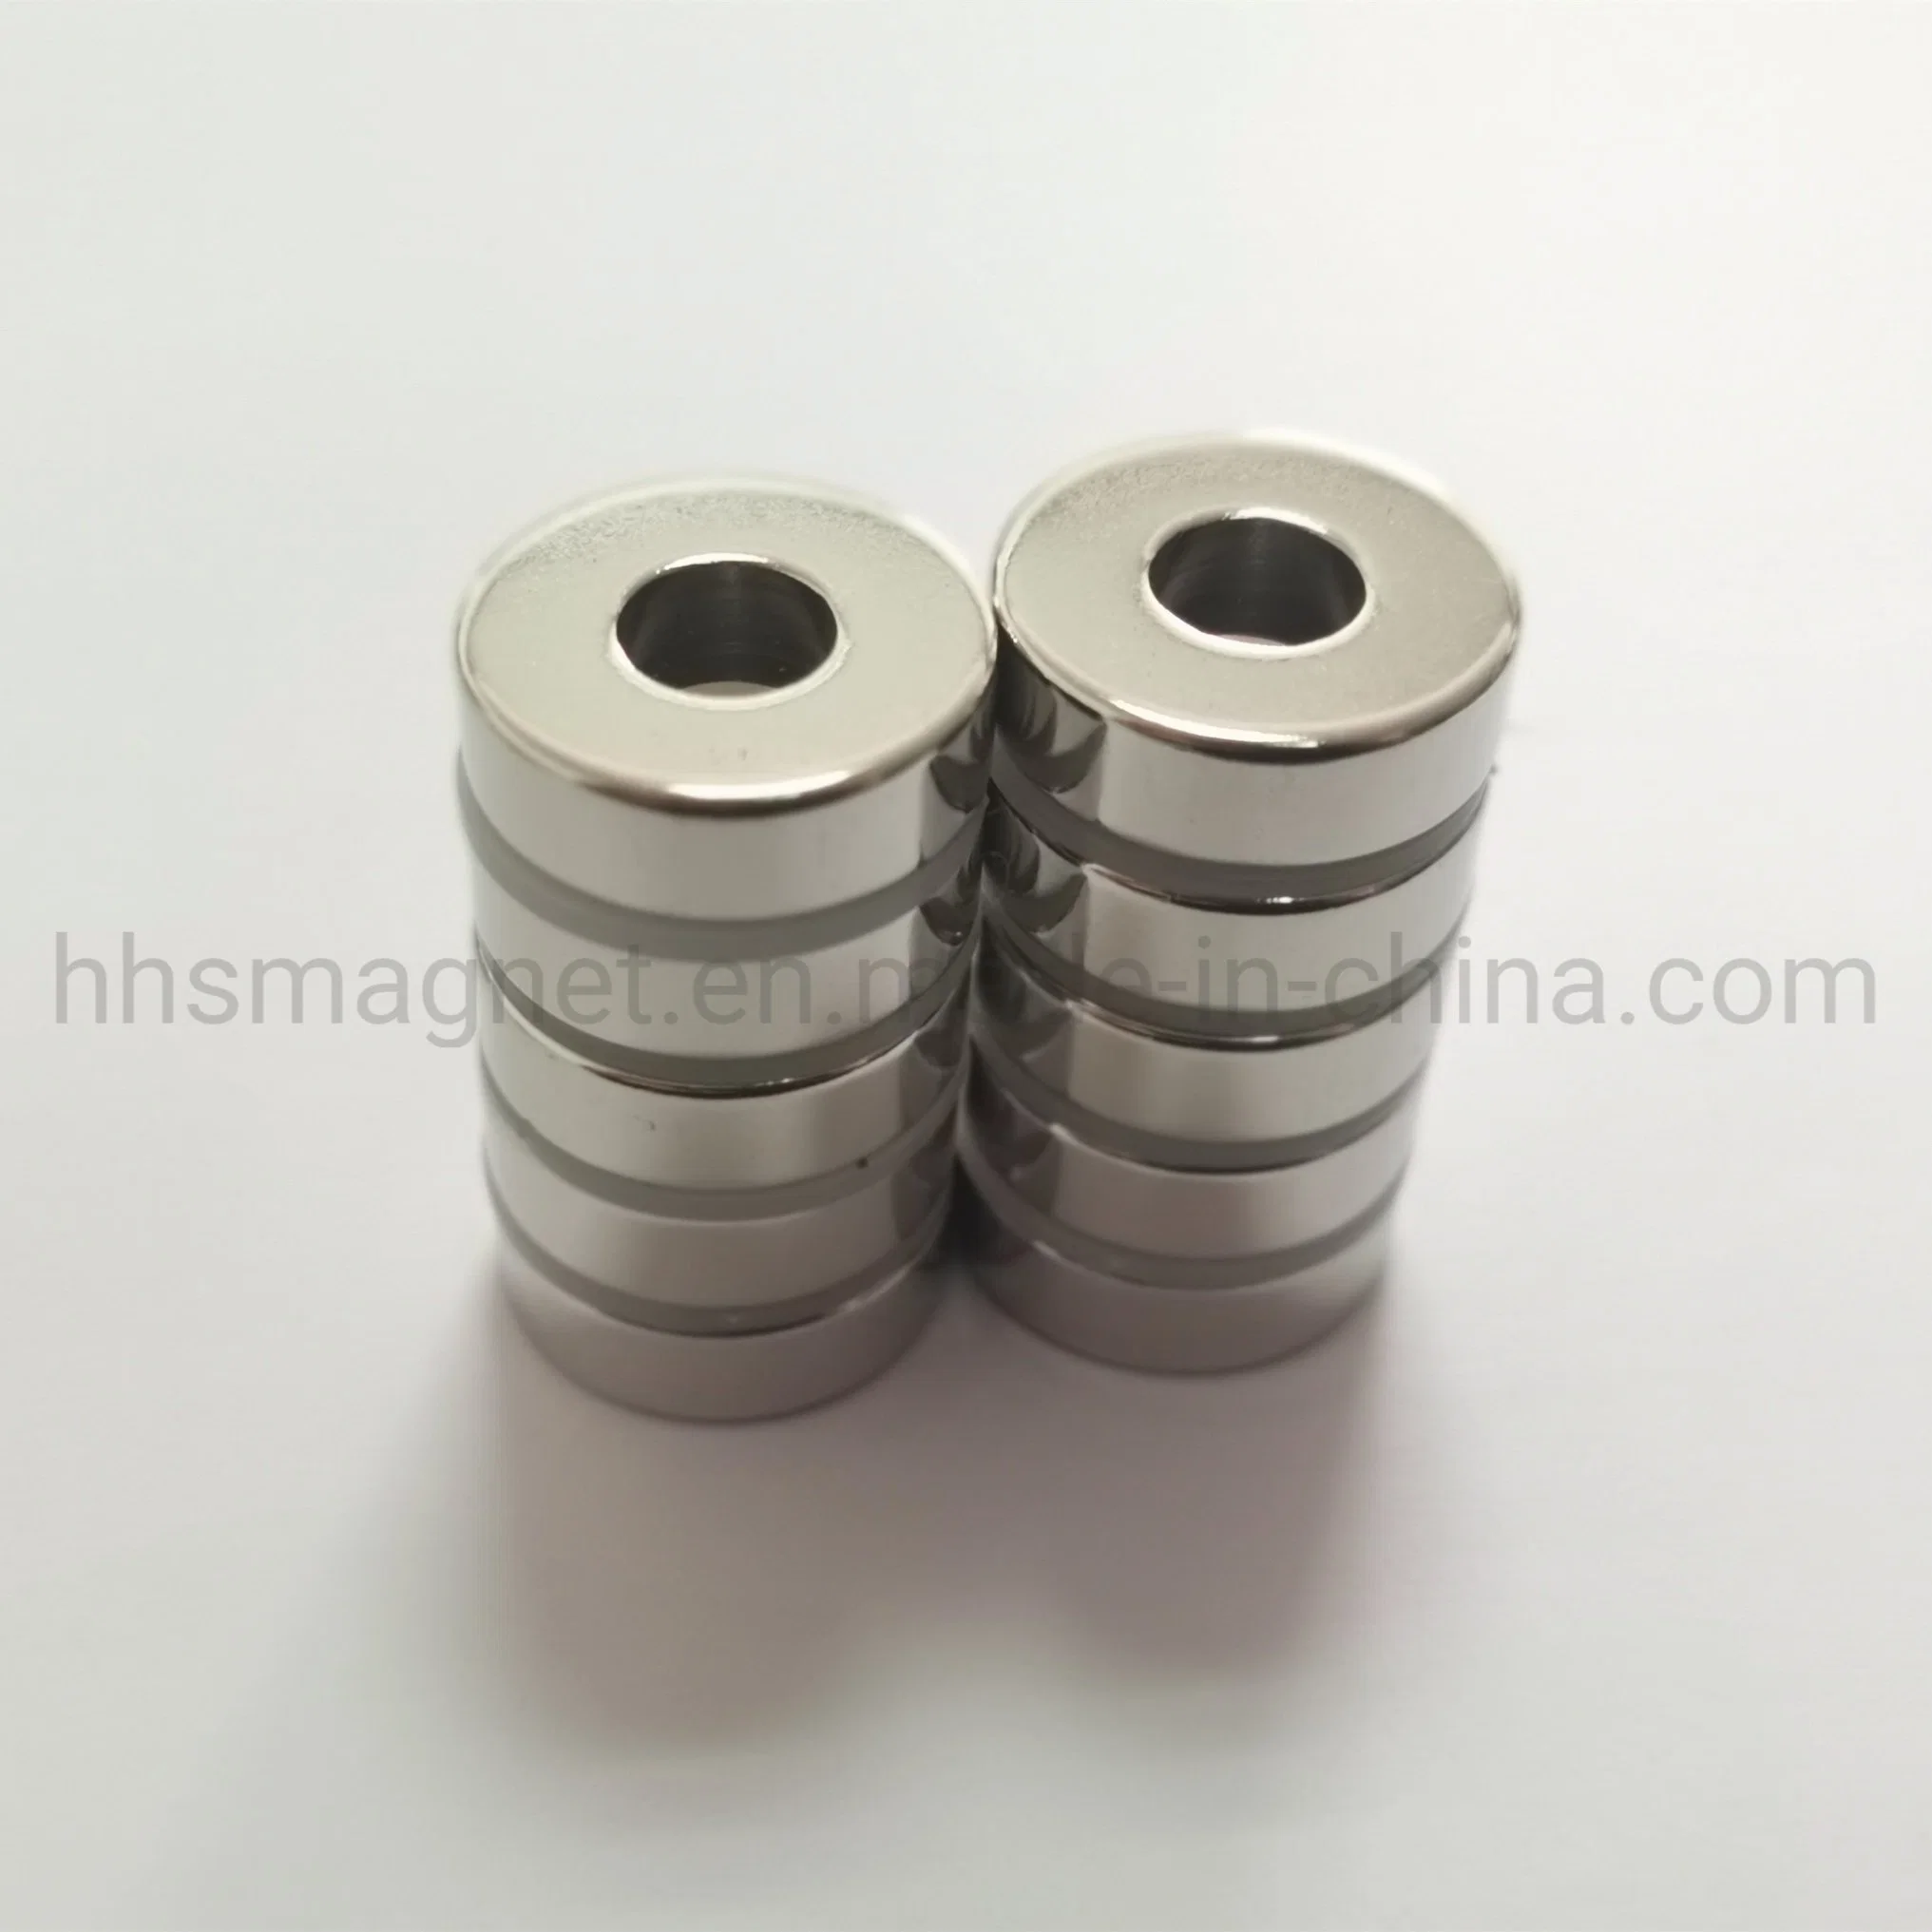 Sintered Ring Neodymium Permanent Magnet for Sound Device